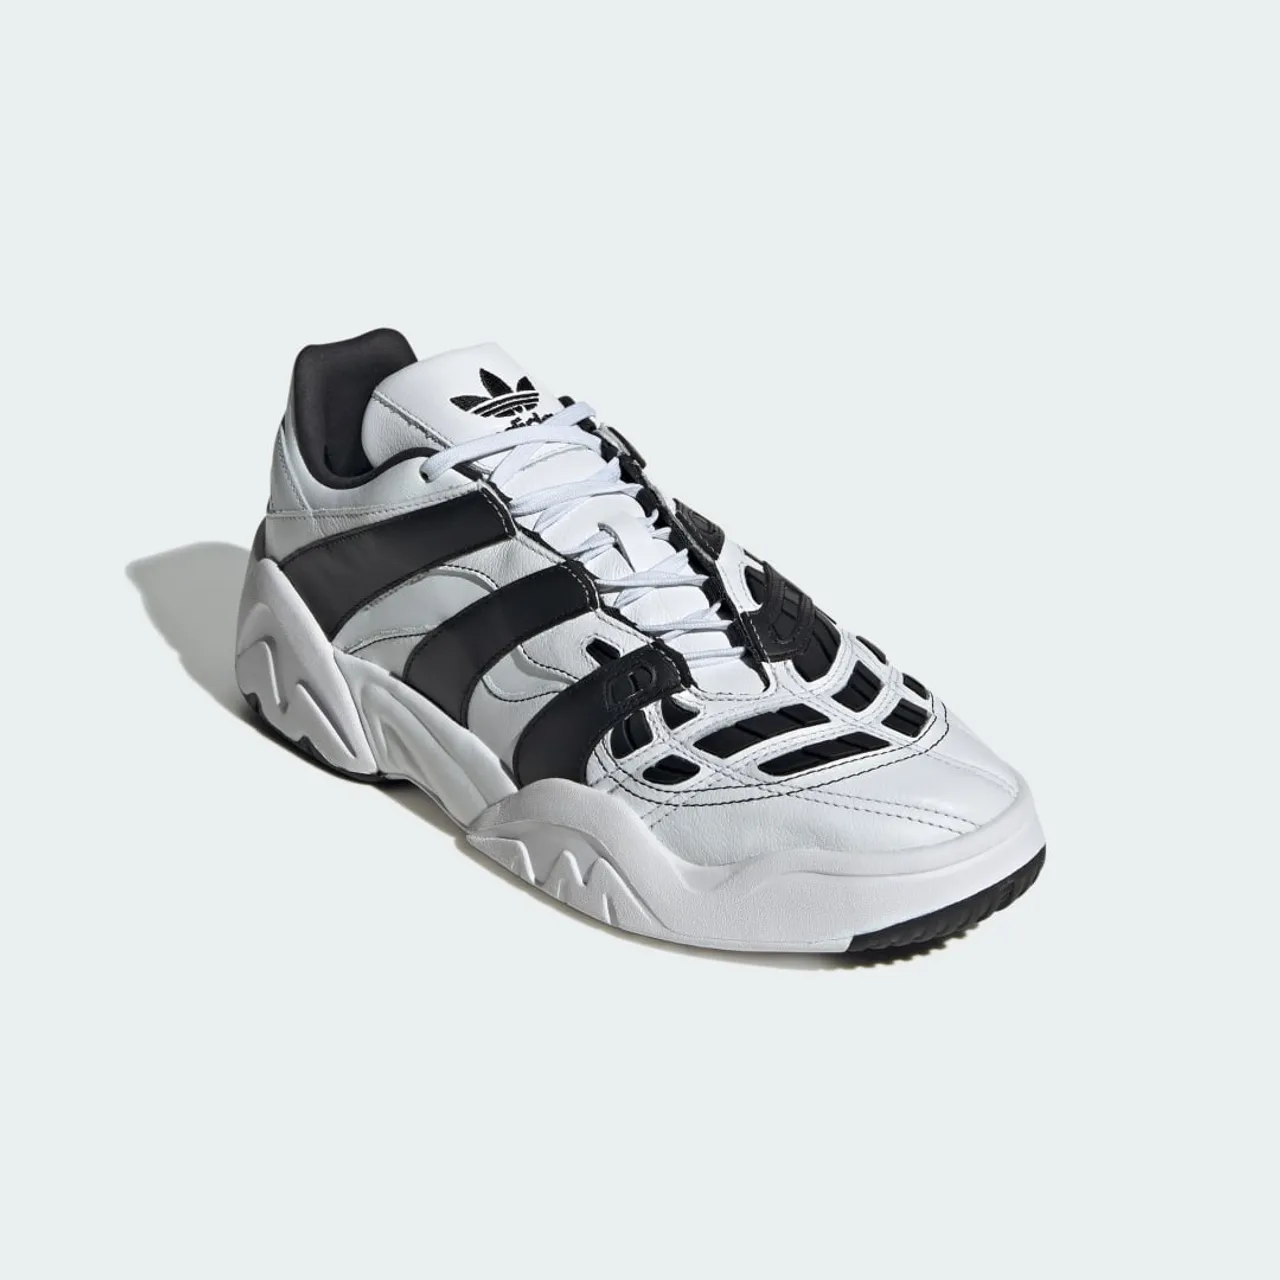 Predator XLG Shoes